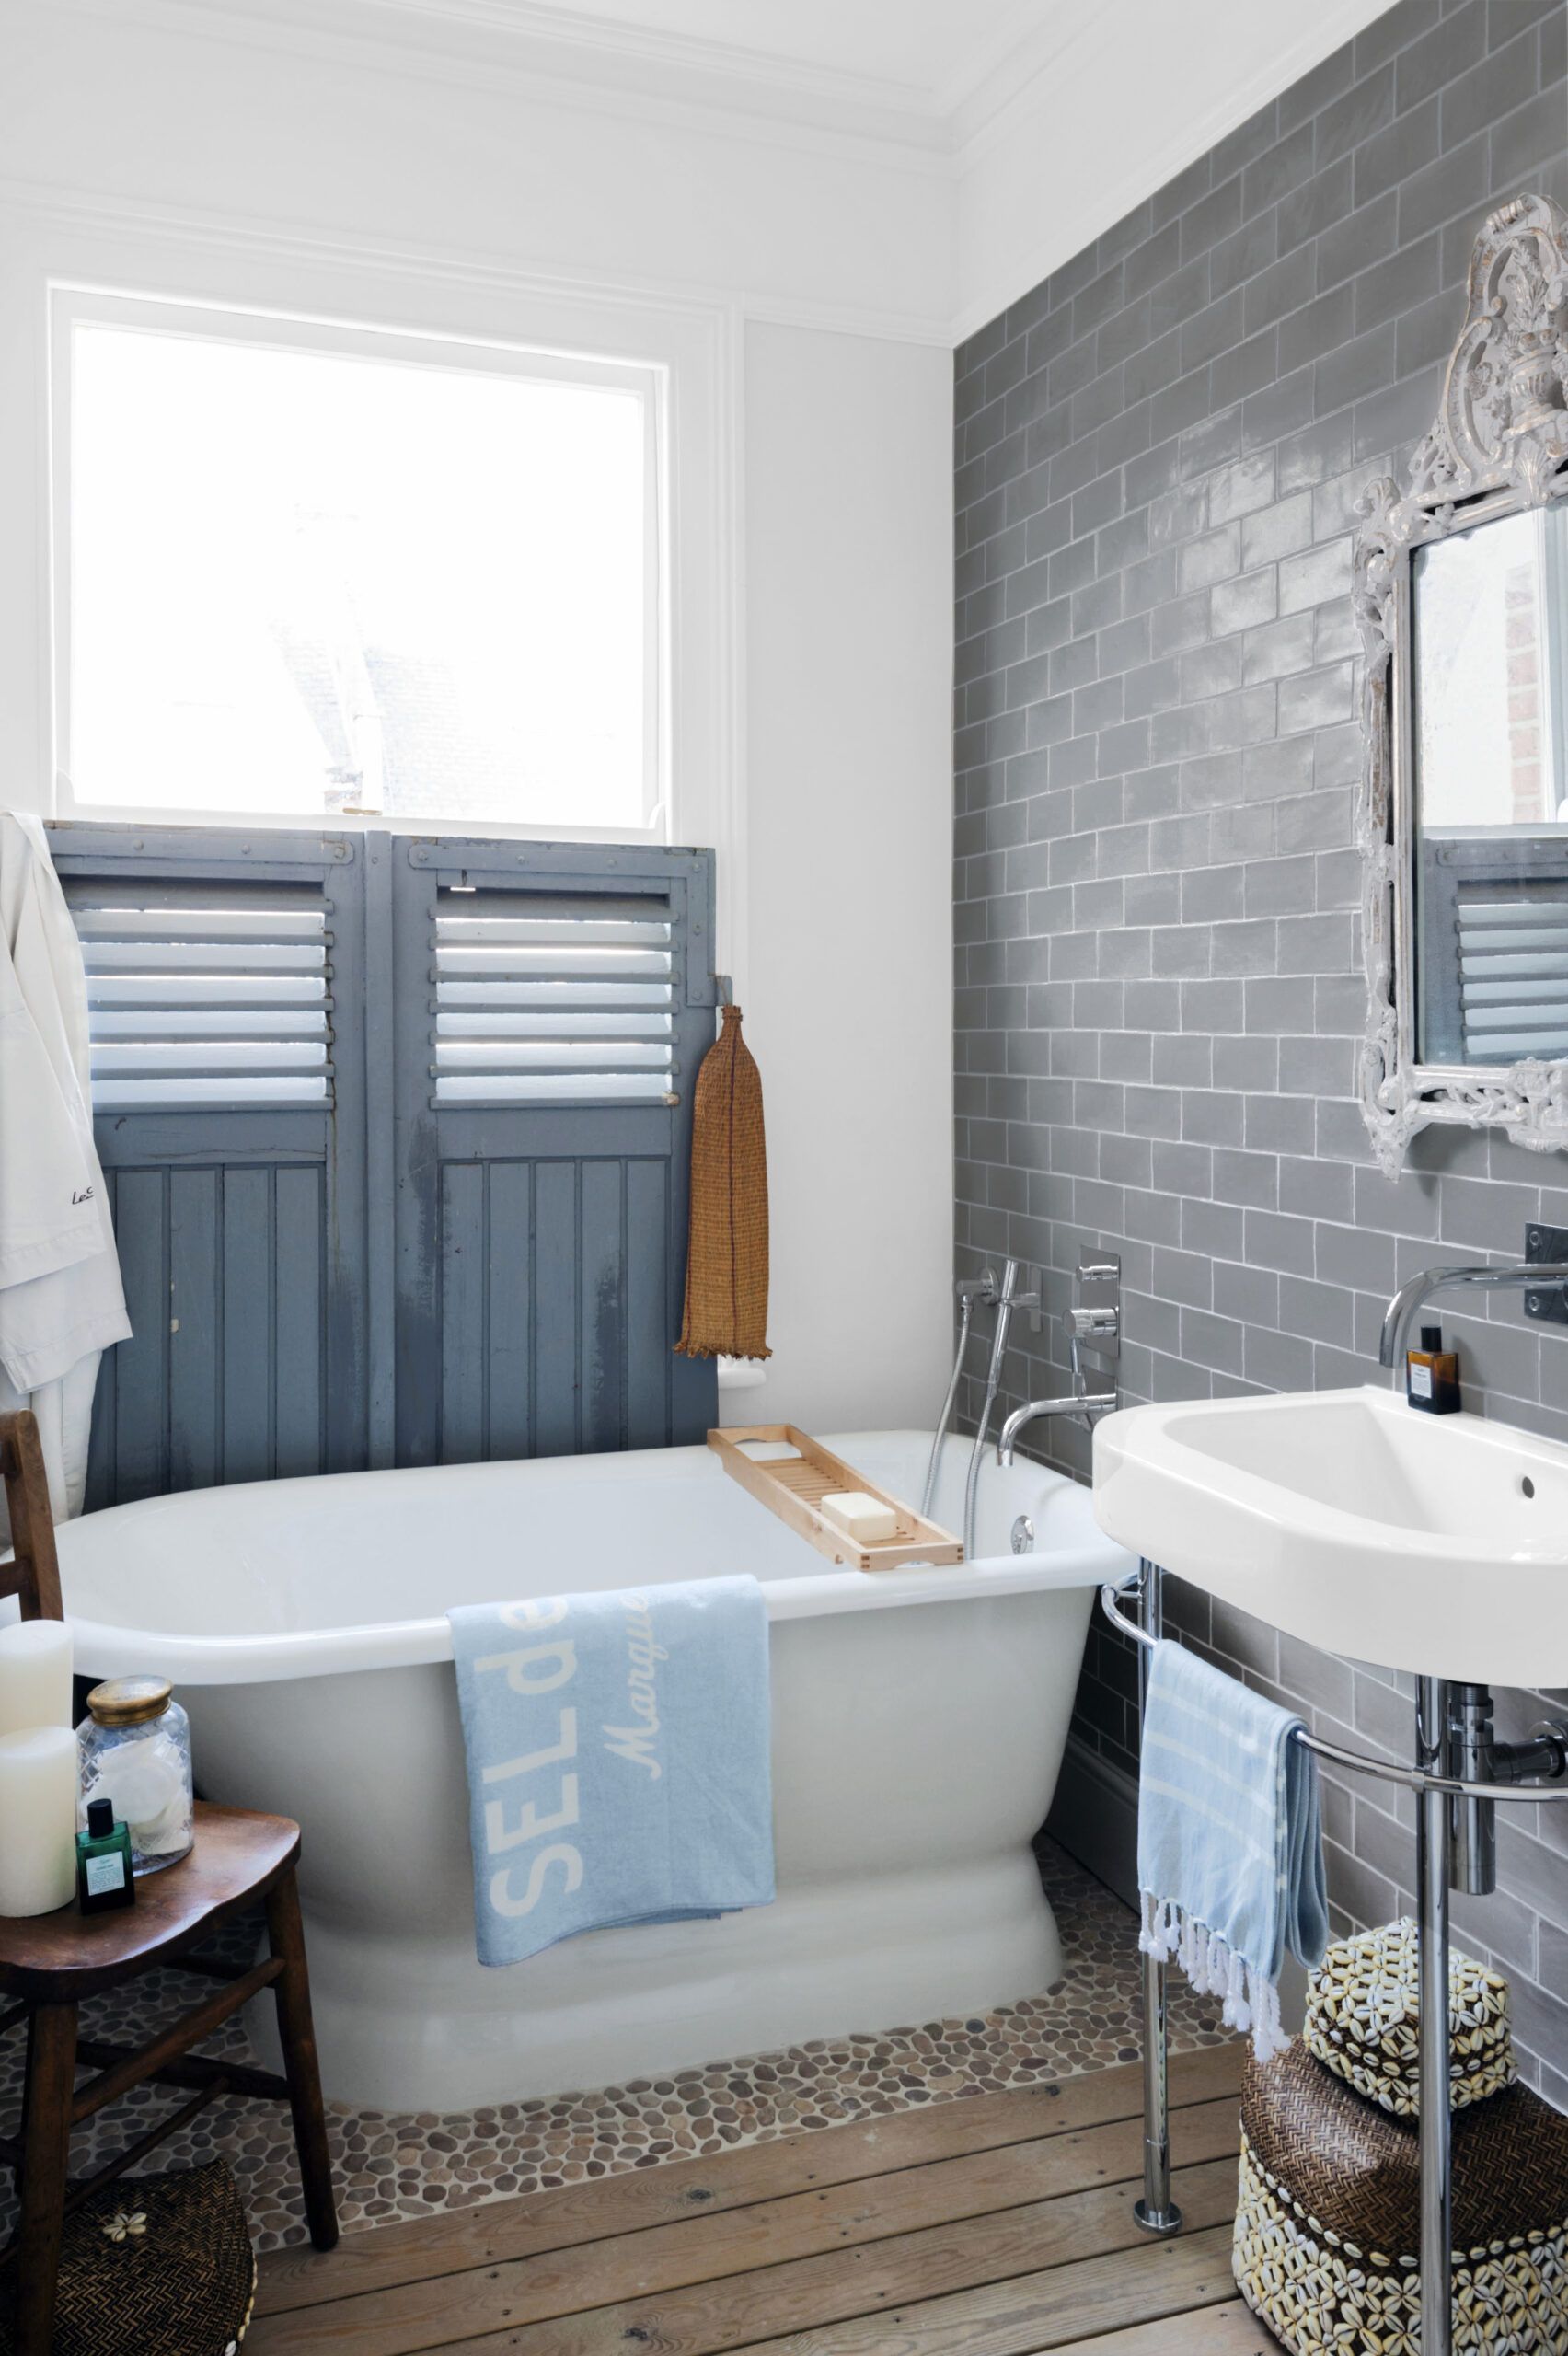 Simple Decor Series: How to Decorate a Small Bathroom on a Budget